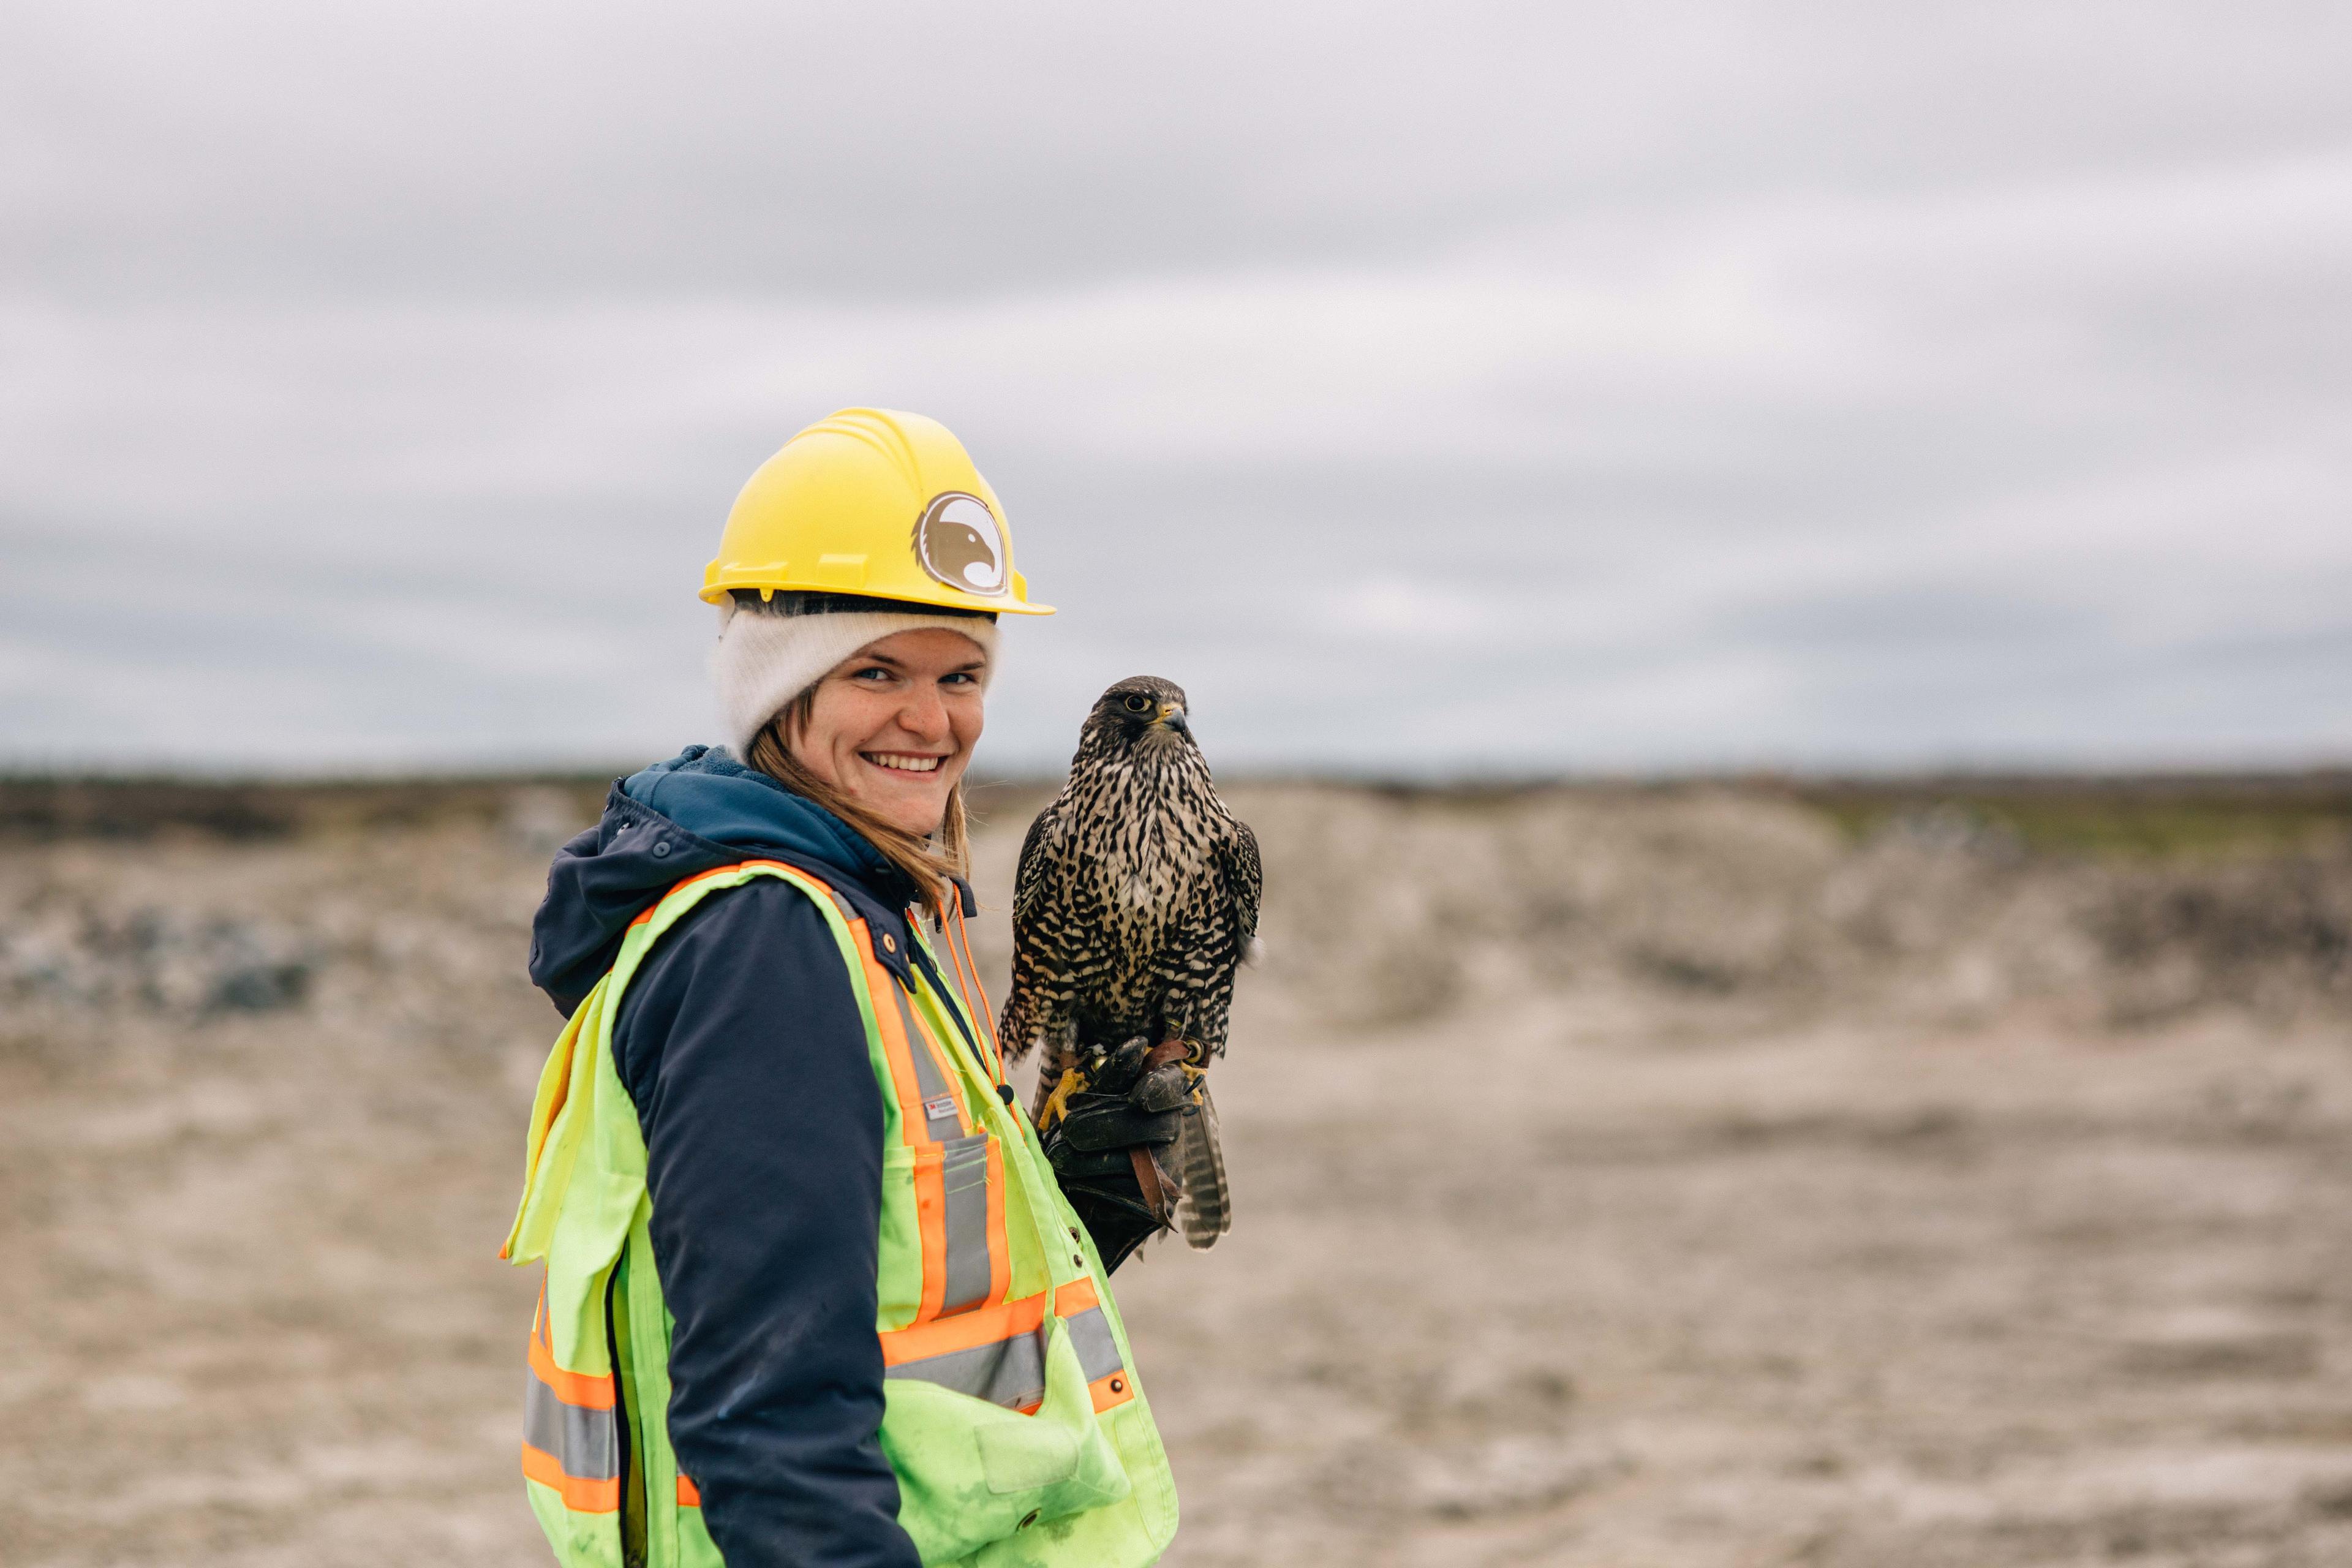 Raptors employee stands with a gyrfalcon on her glove